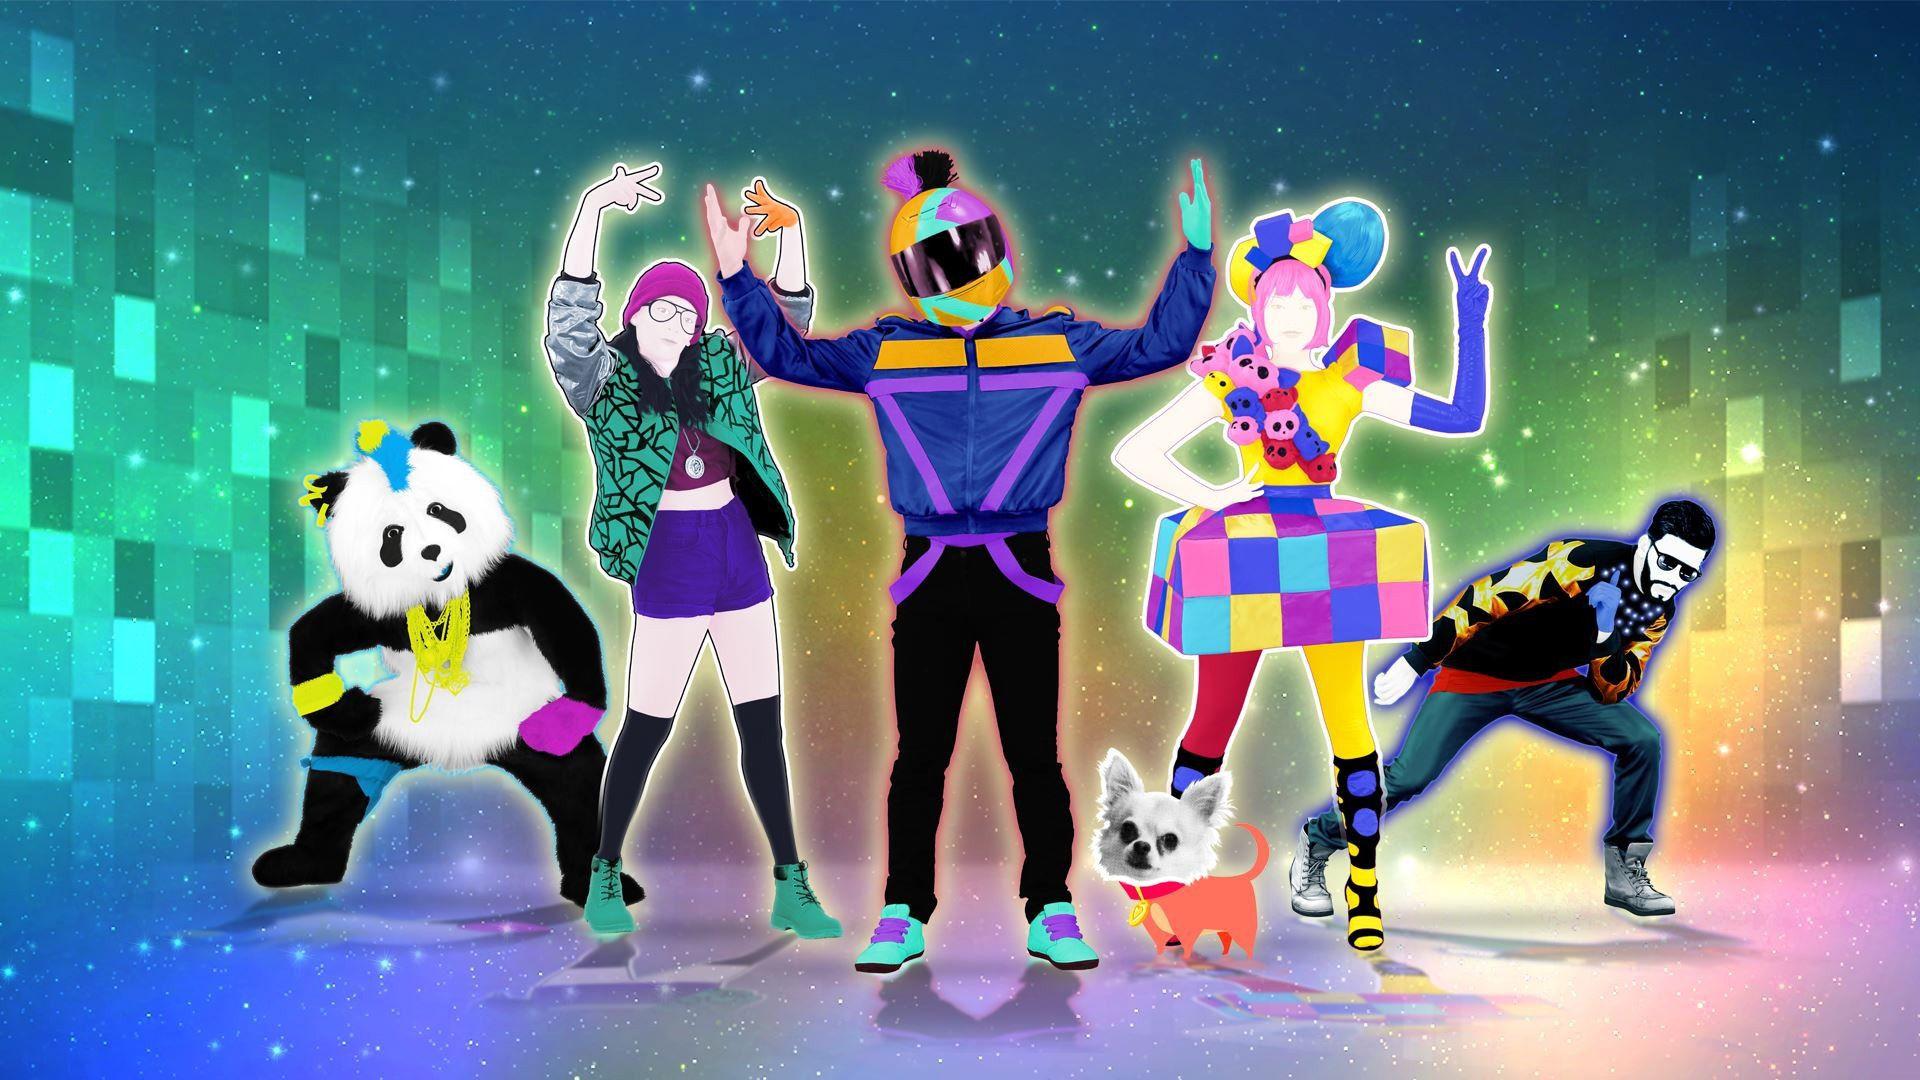 download just dance 4 maneater for free